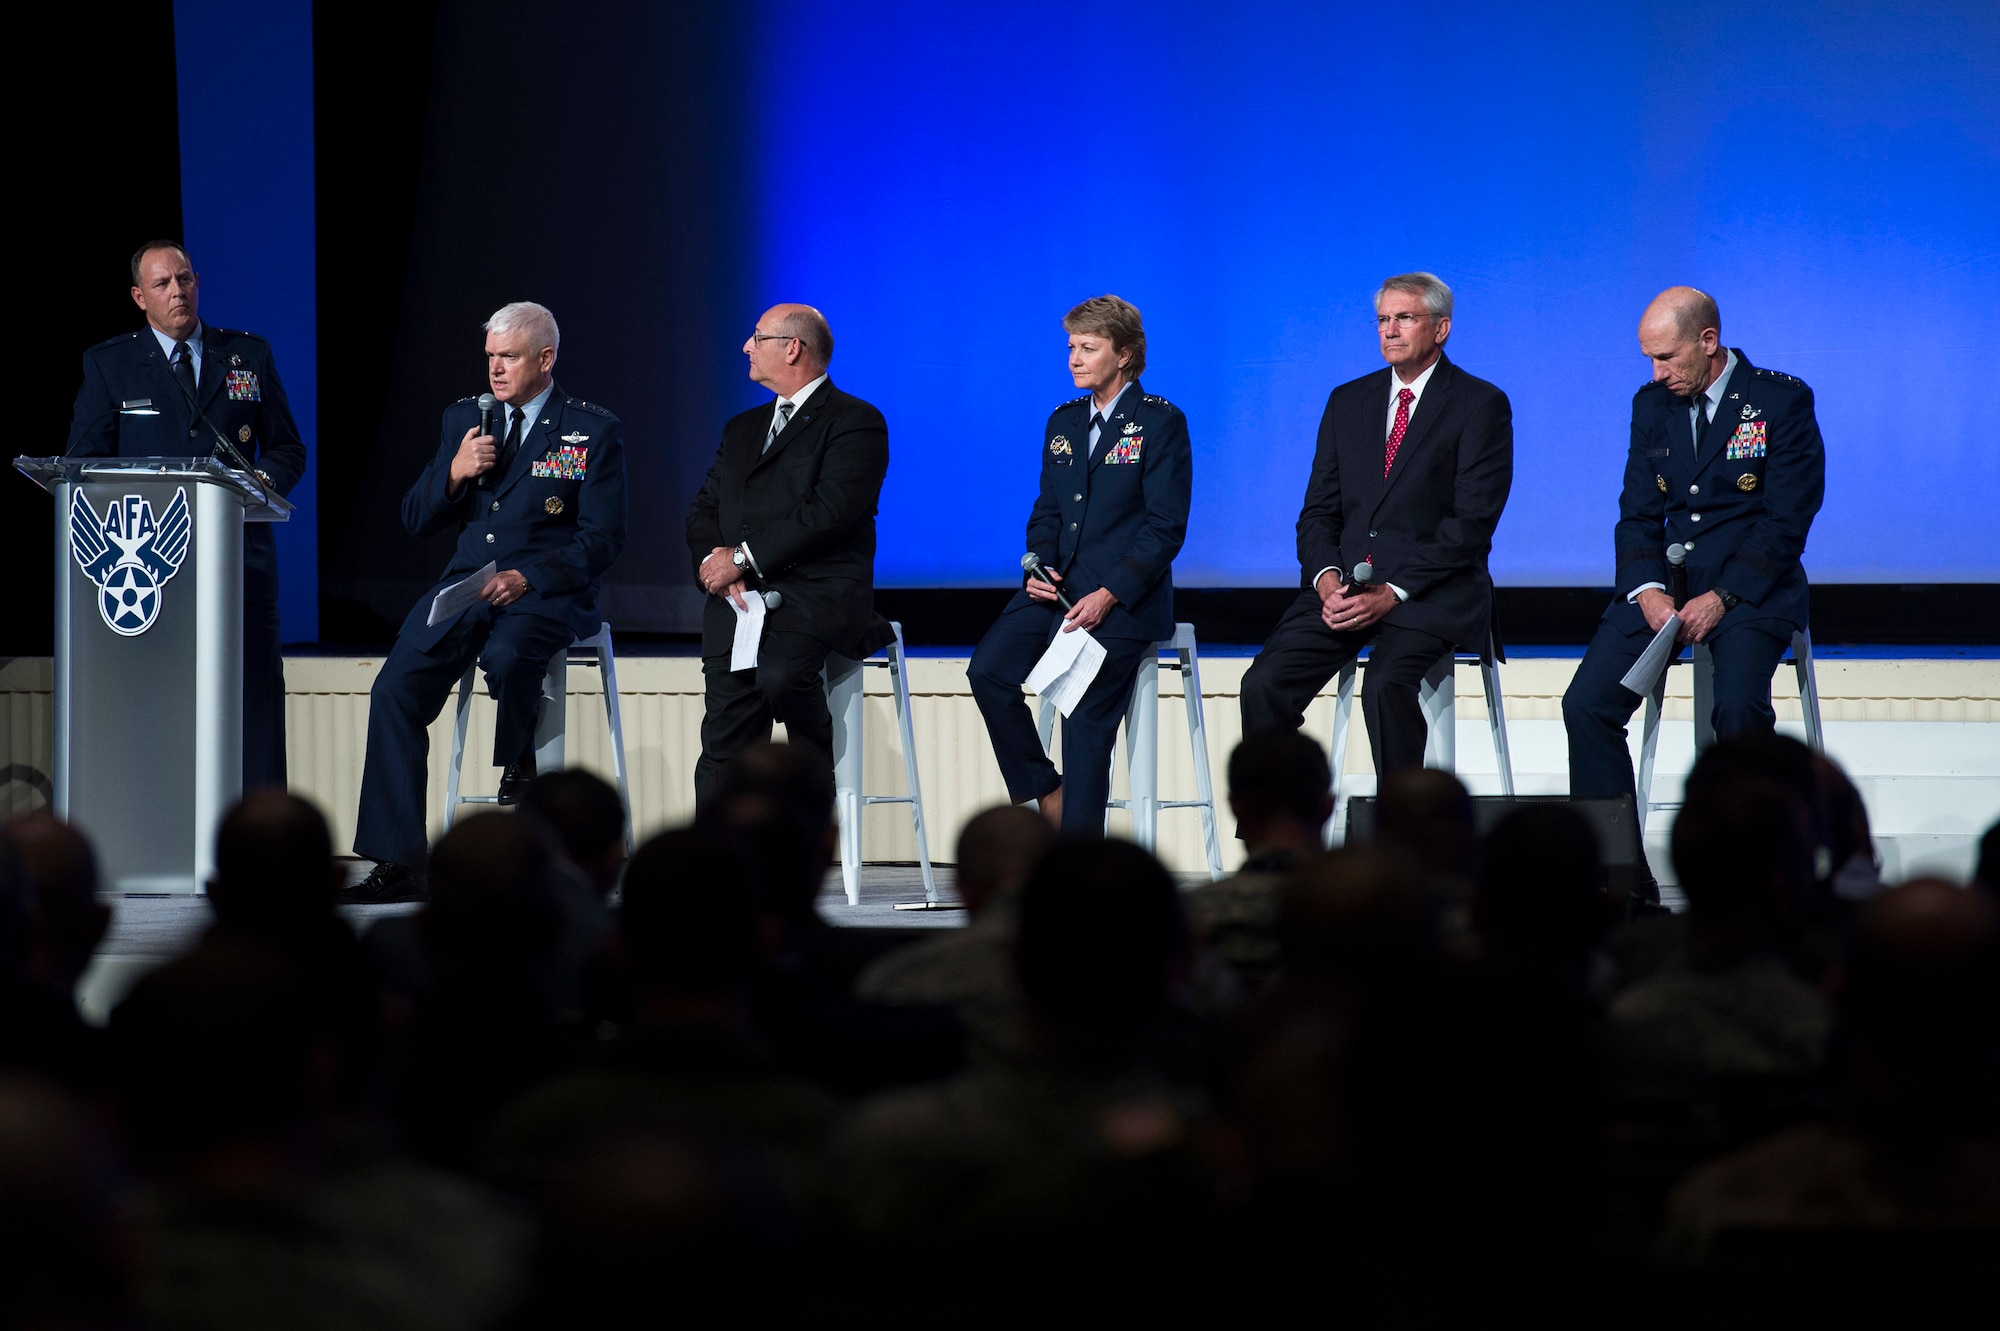 Gen. James M. Holmes, Air Combat Command commander, talks about overcoming the national pilot shortage during the Air Force Association’s Air, Space and Cyber Conference in National Harbor, Md., Sept. 18, 2018. The ASC18 is a professional development conference that offers an opportunity for Department of Defense personnel to participate in forums, speeches, seminars and workshops. (U.S. Air Force photo by Tech. Sgt. DeAndre Curtiss)